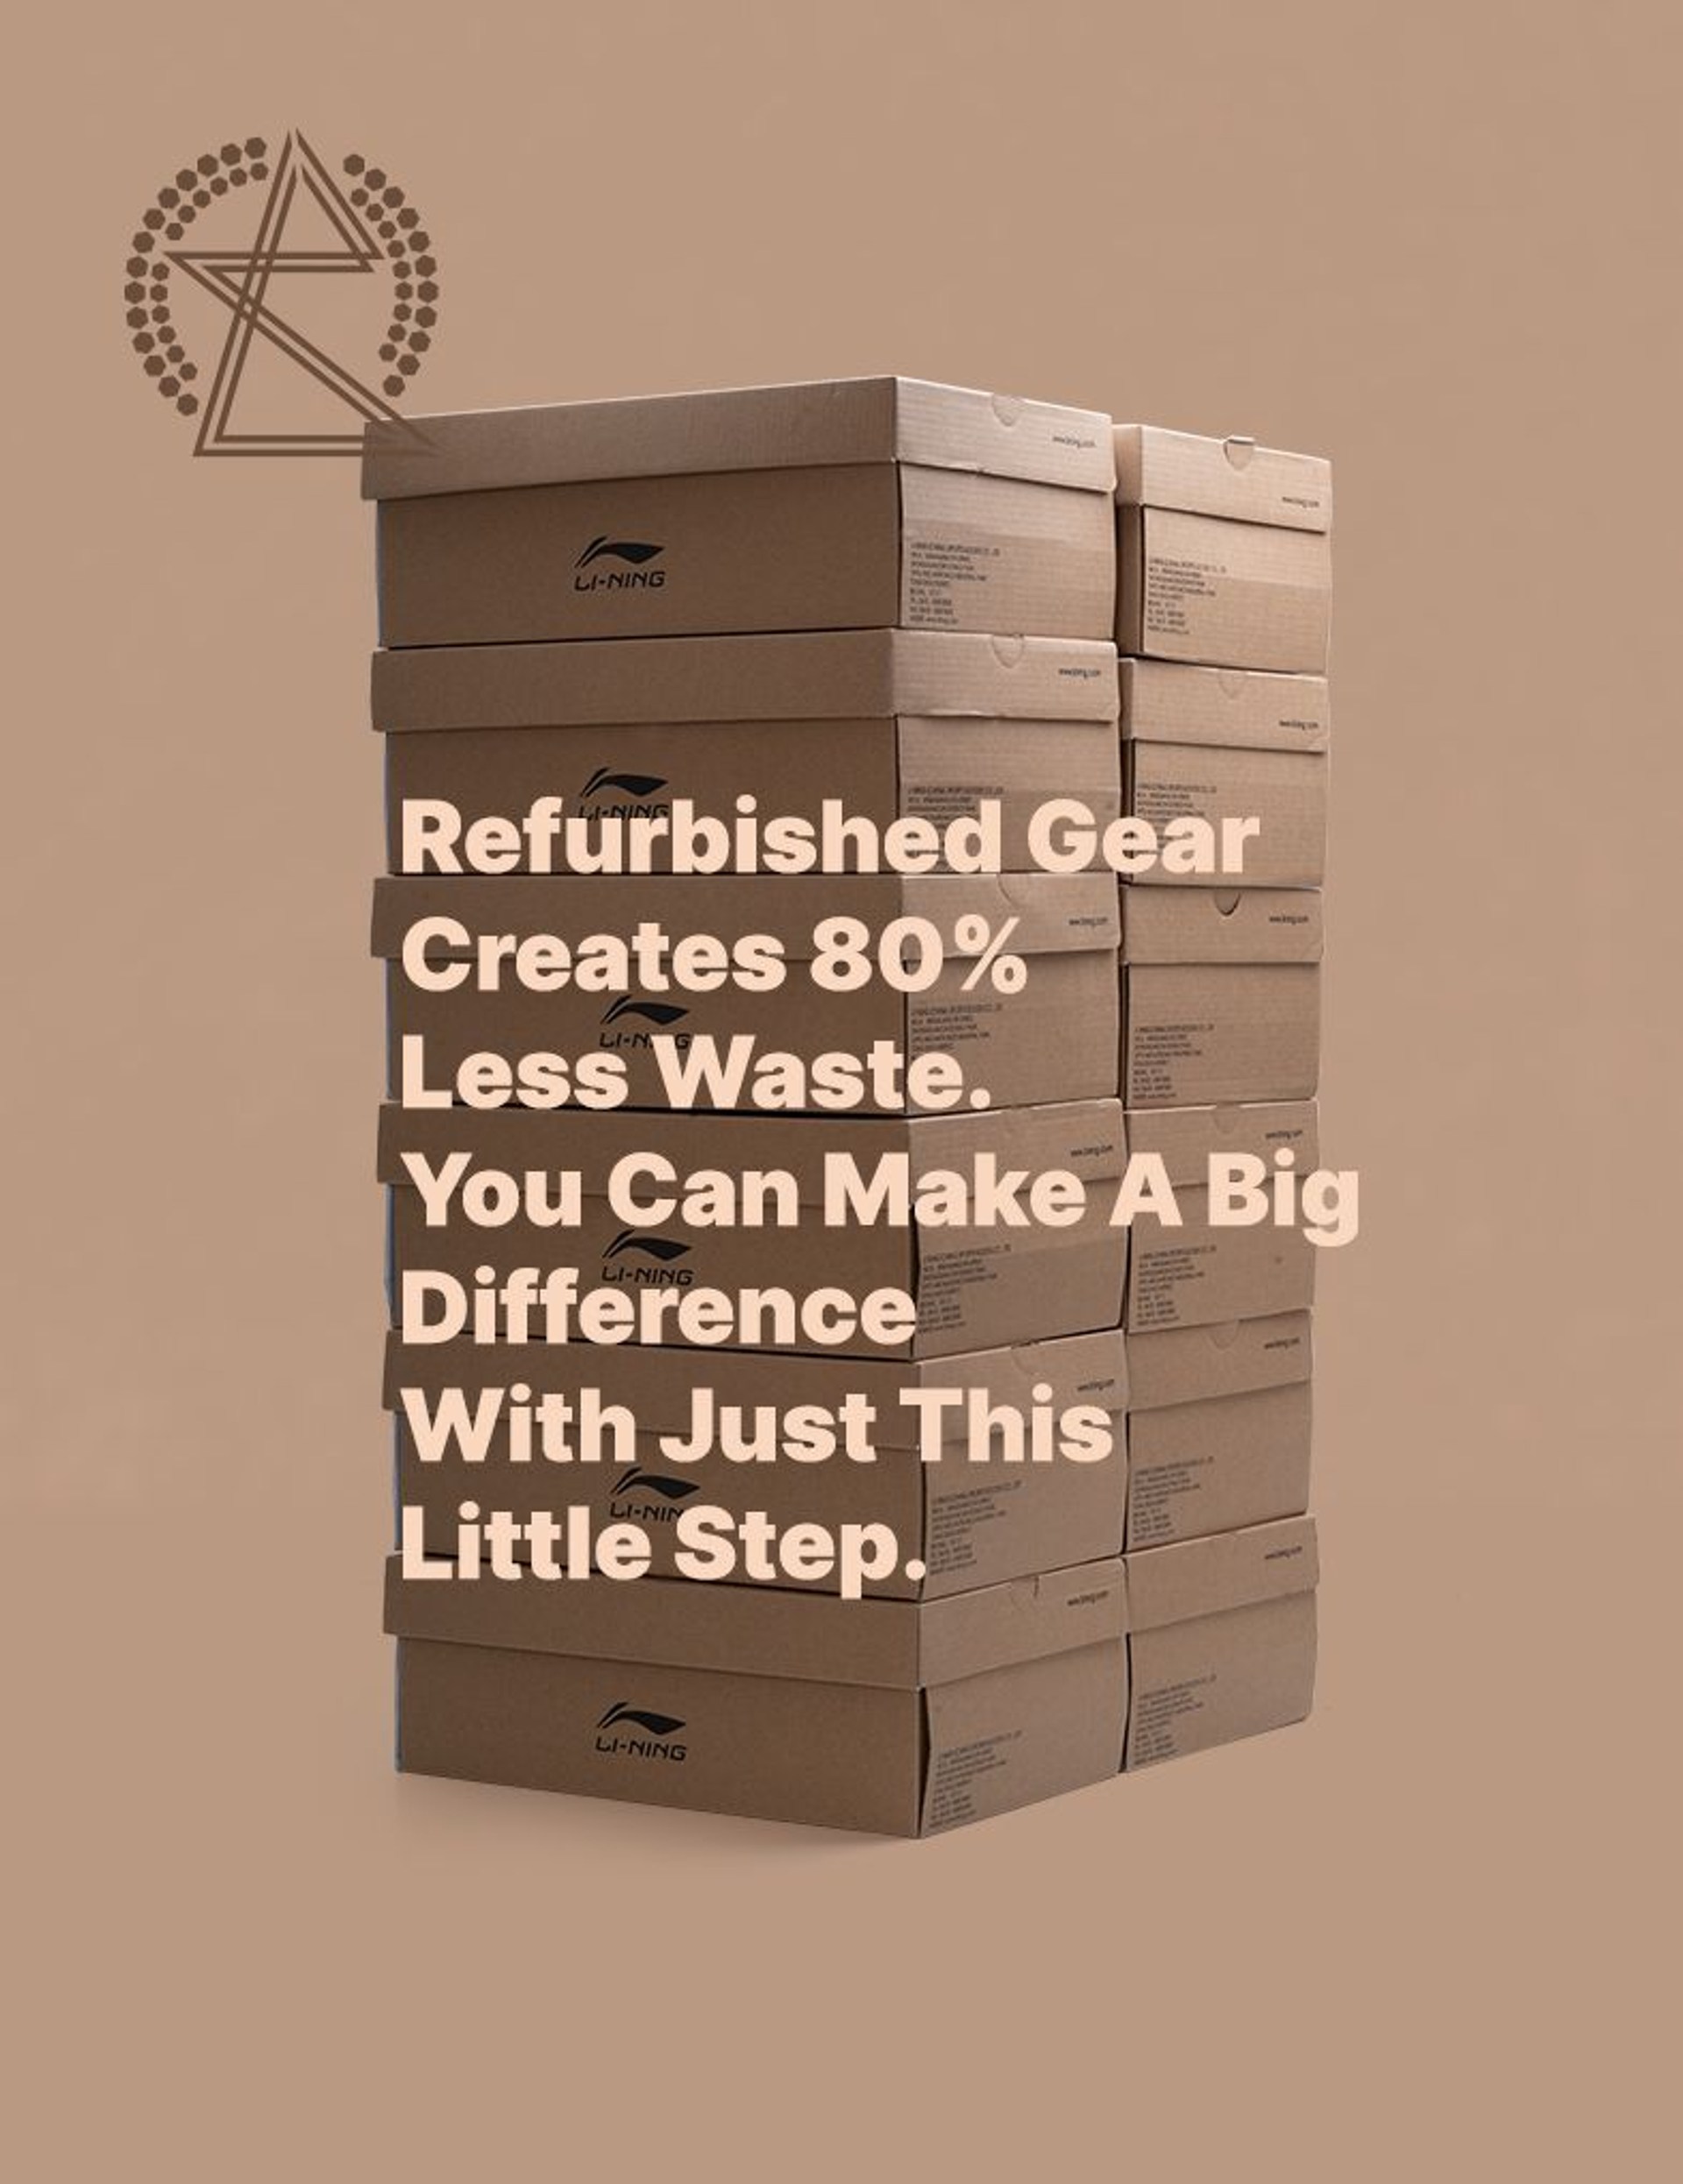 Refurbished Gear Creates 80% Less Waste. You Can Make A Big Difference With Just This Little Step.